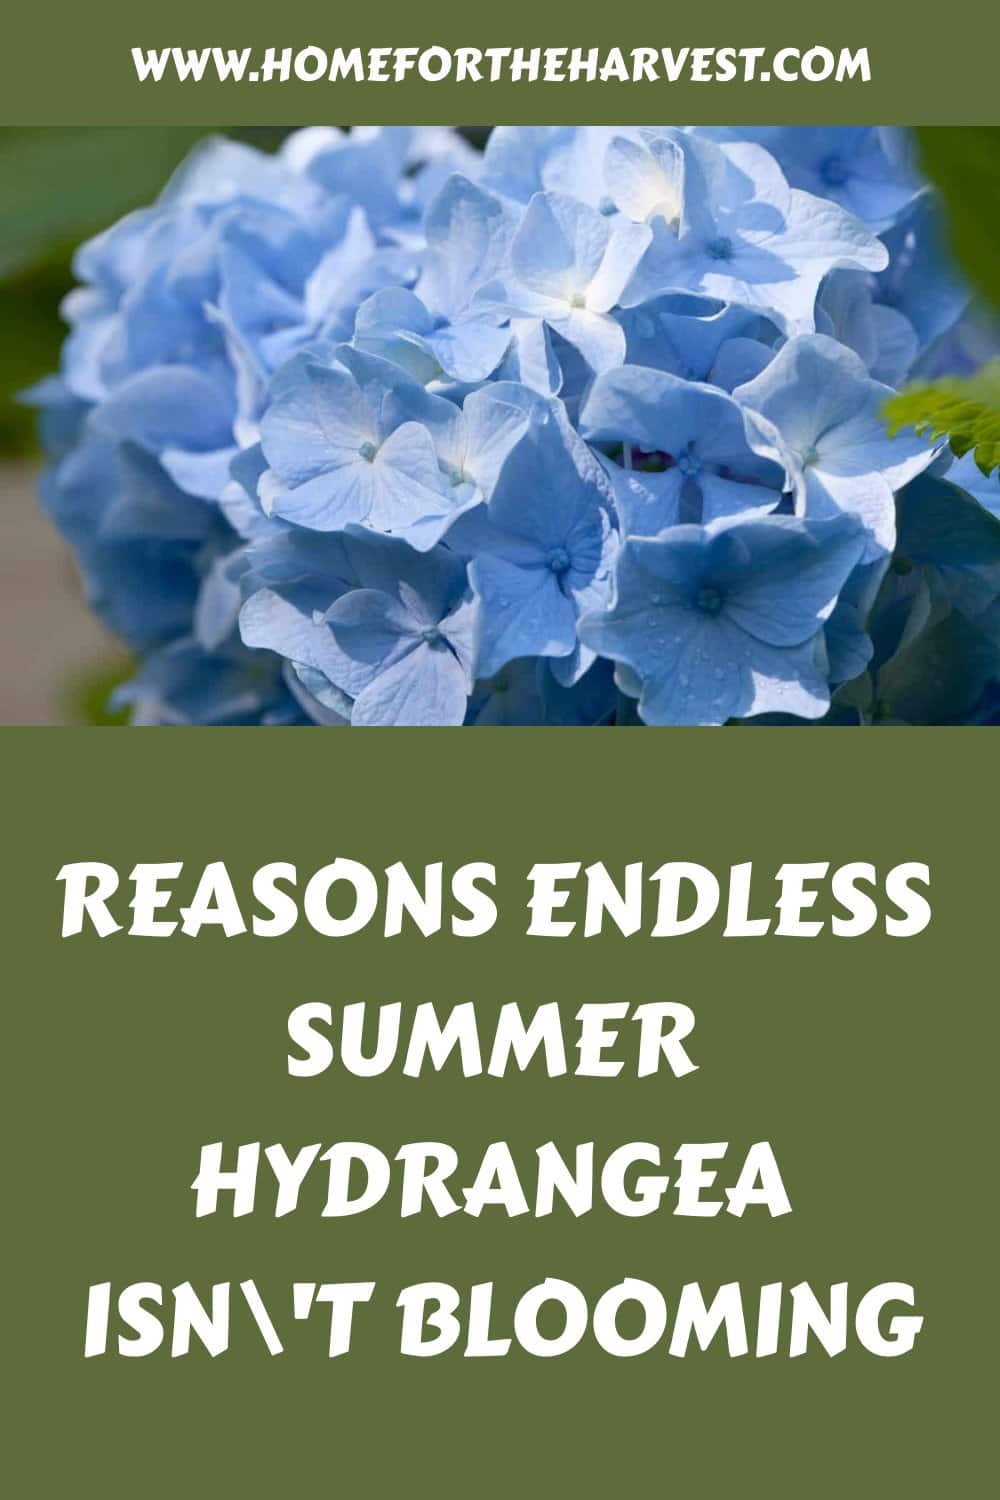 Reasons endless summer hydrangea isnt blooming generated pin 48102